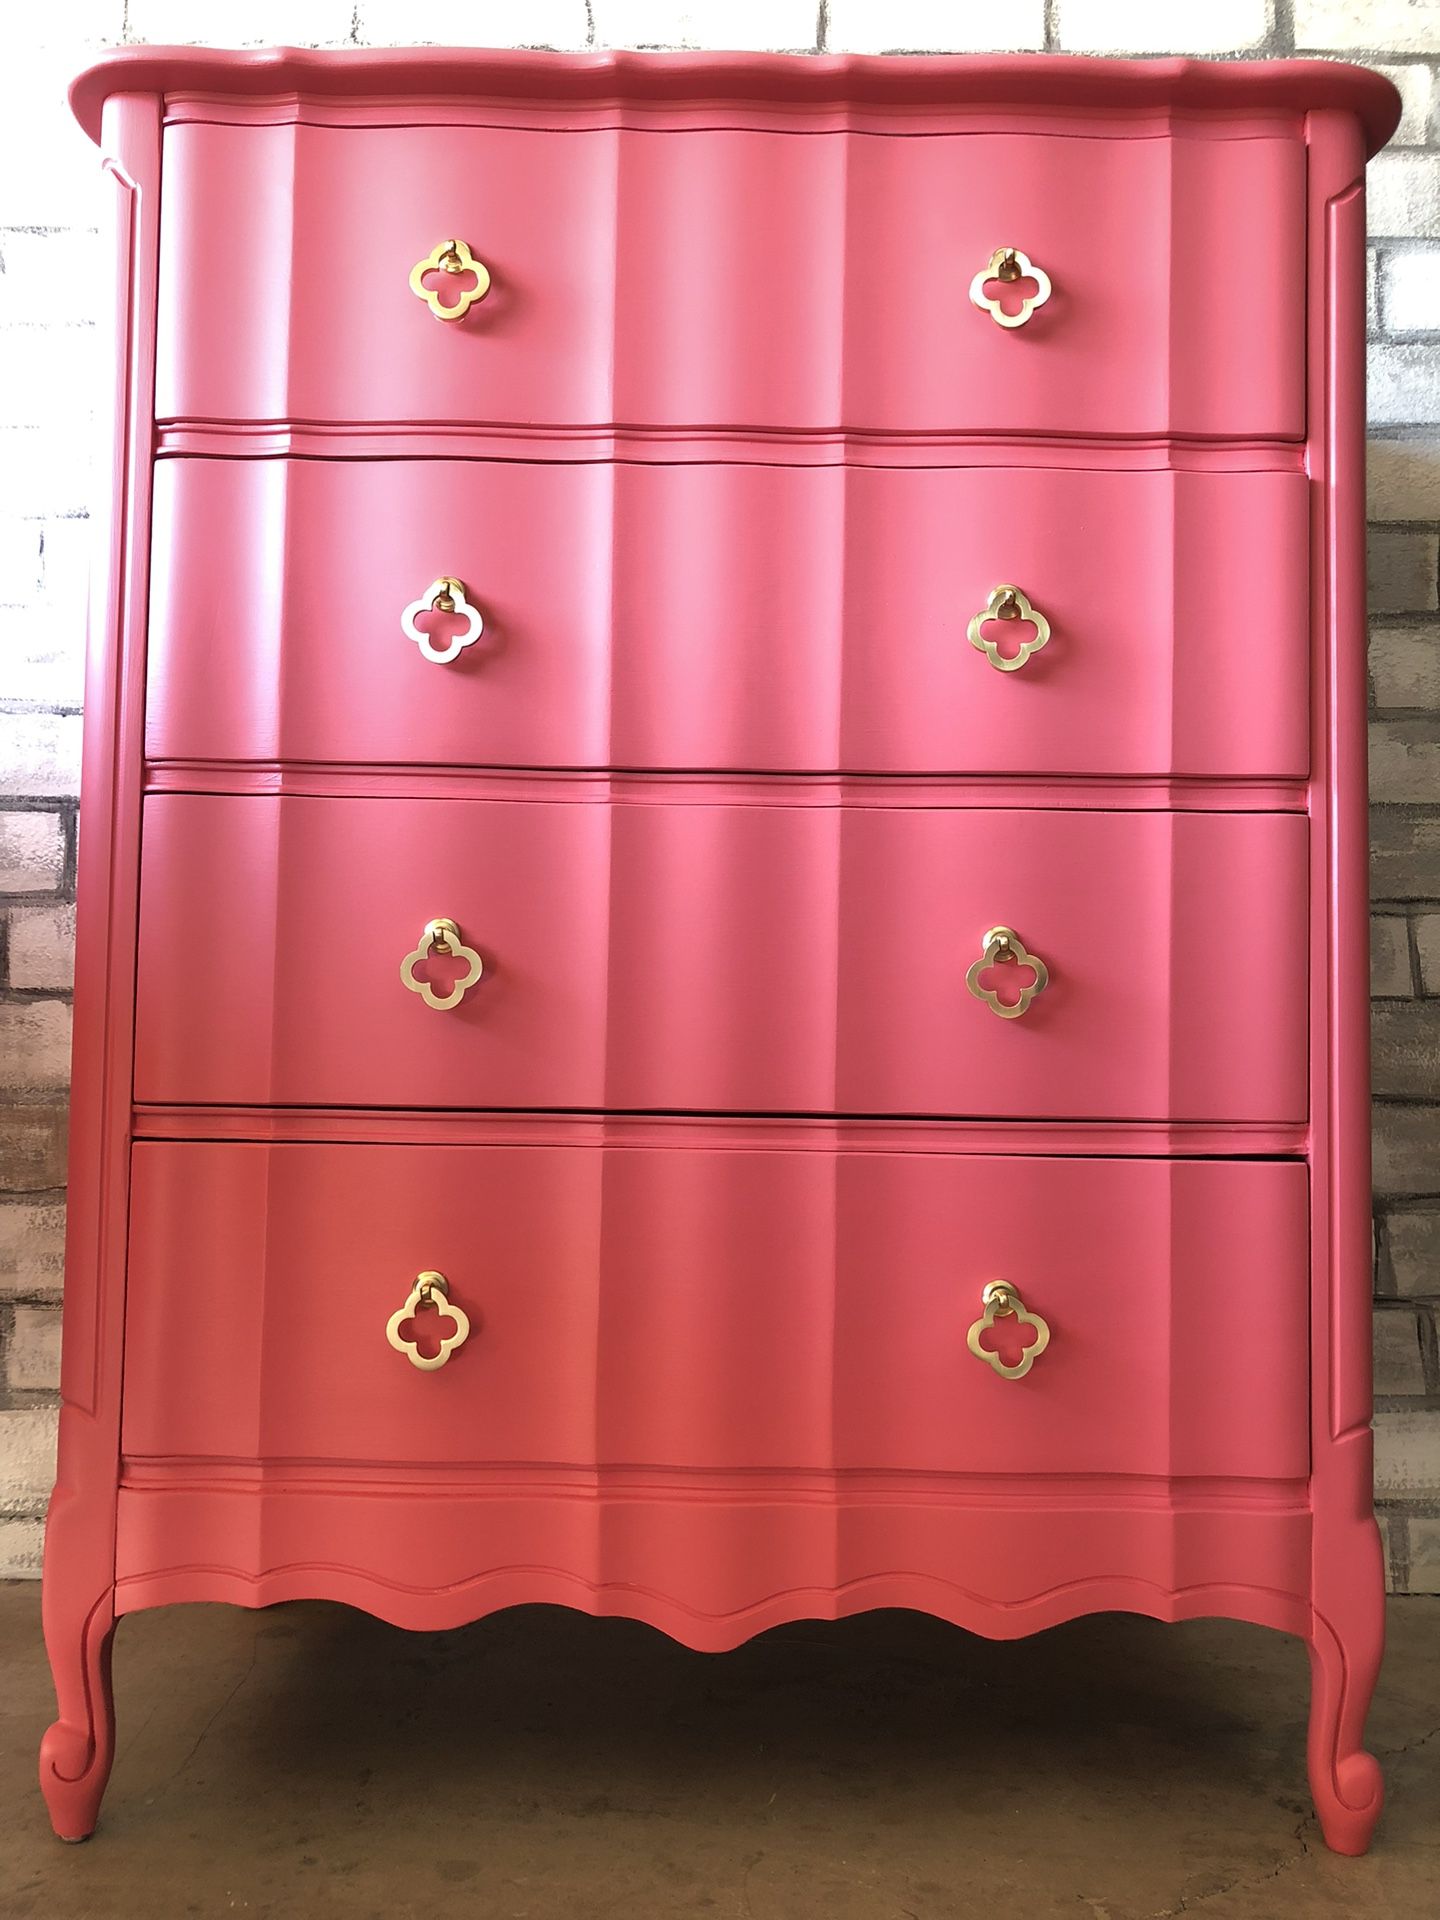 Painted Dressers Are Here! 